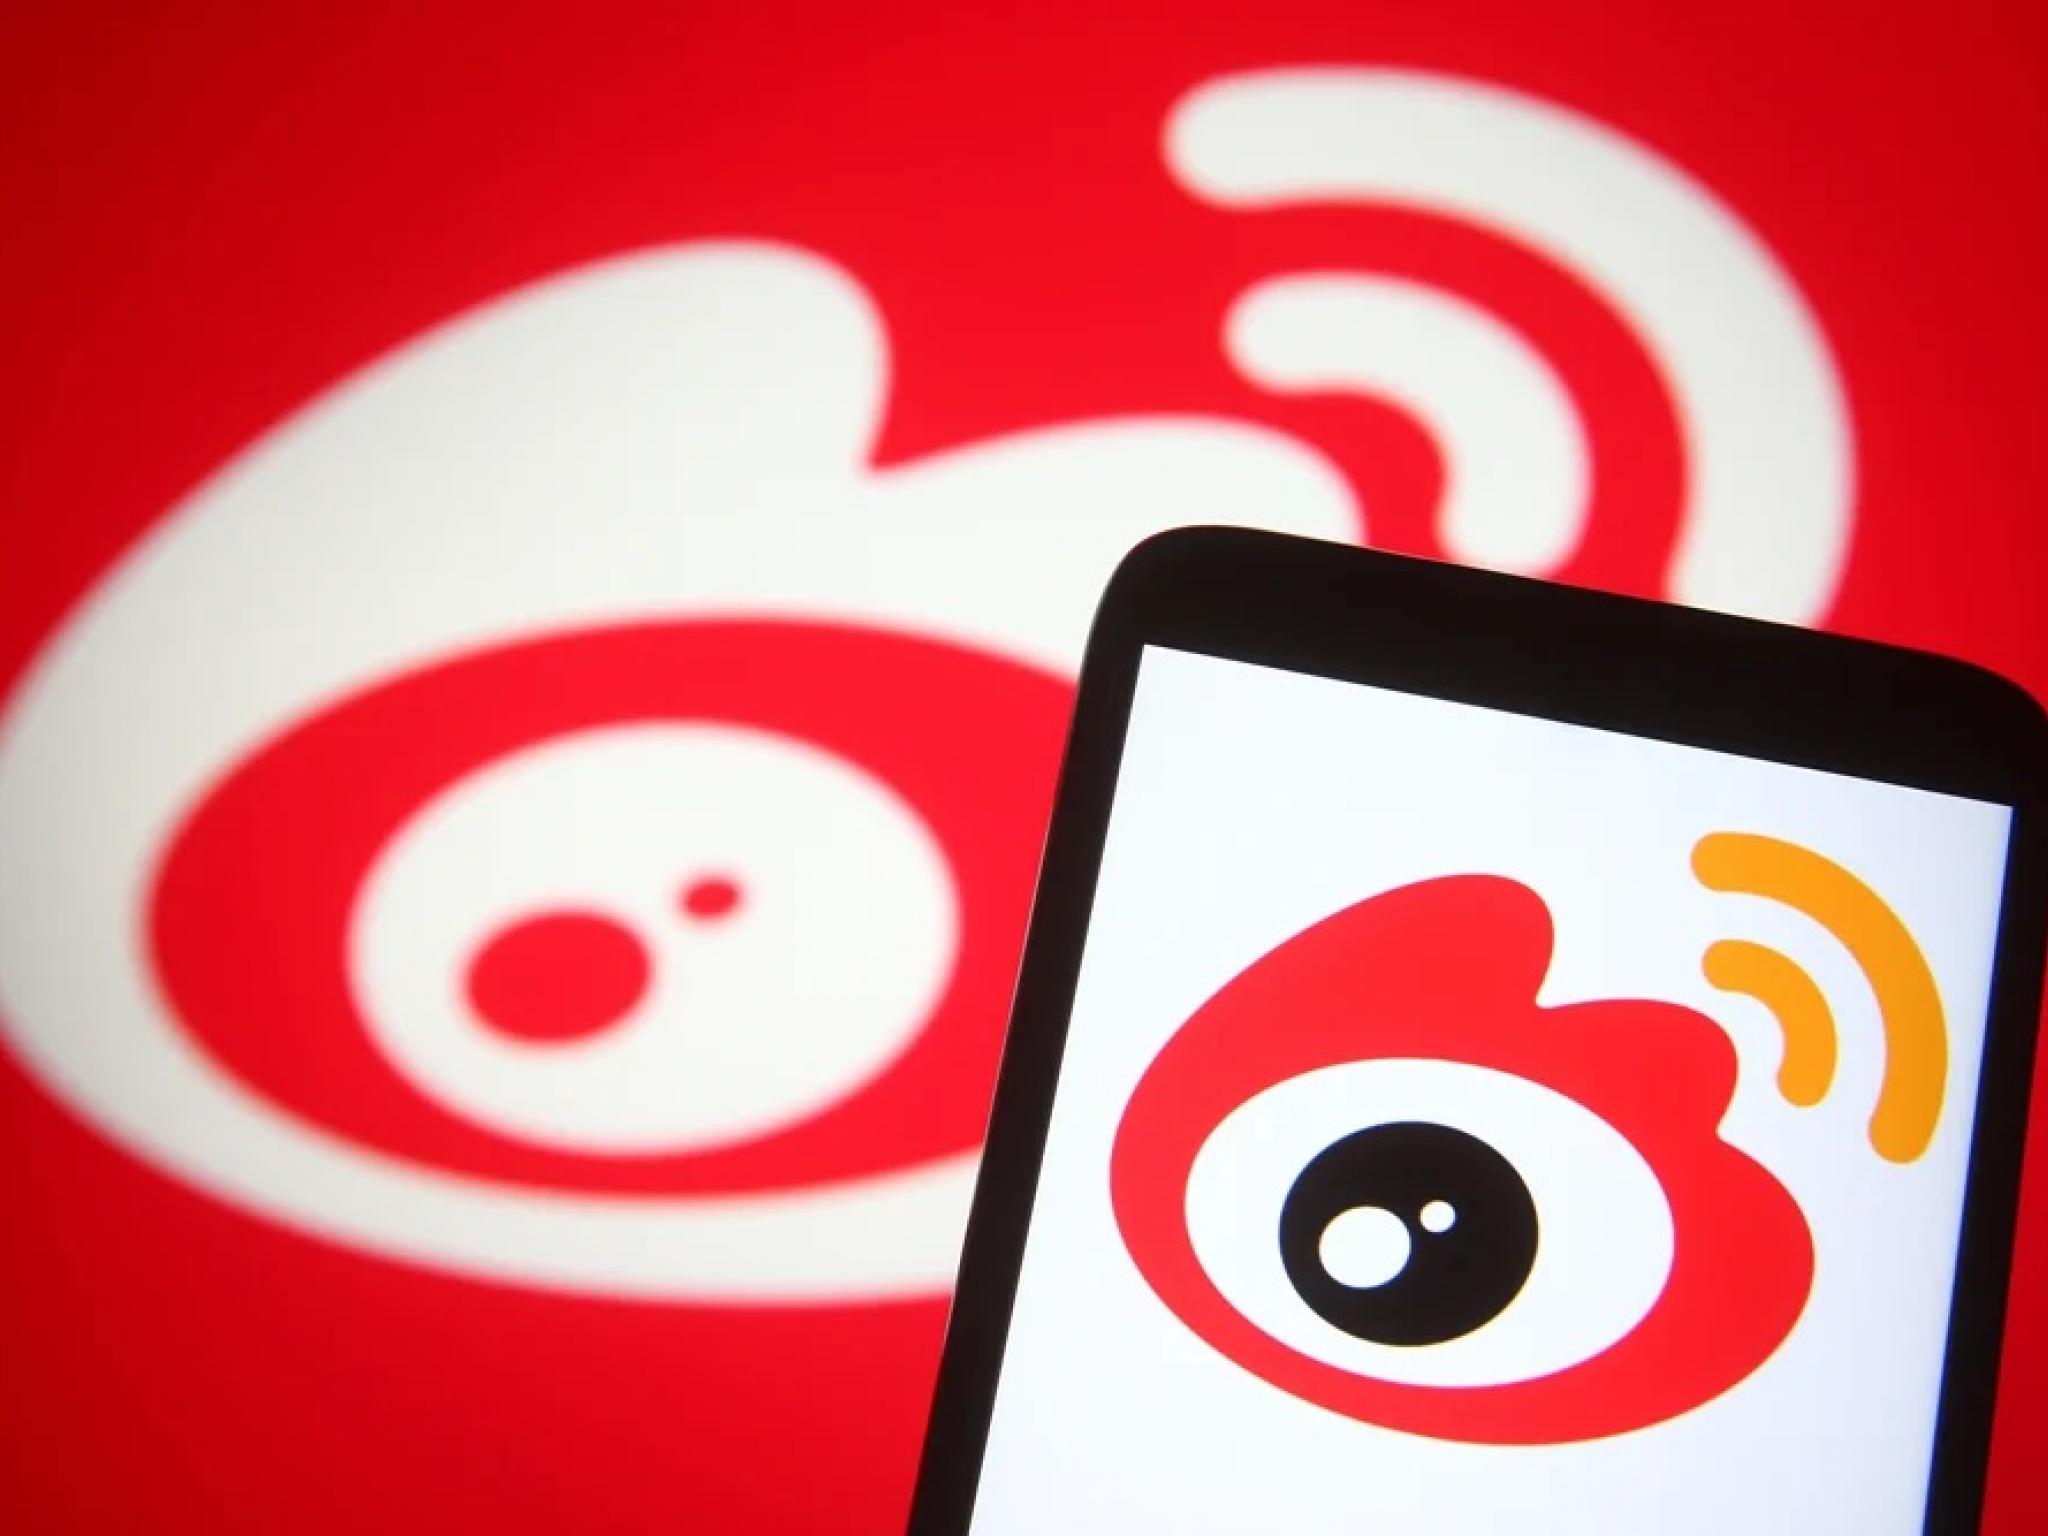  weibo-recovery-still-in-the-works-due-to-soft-ad-revenue-analyst-no-longer-bullish 